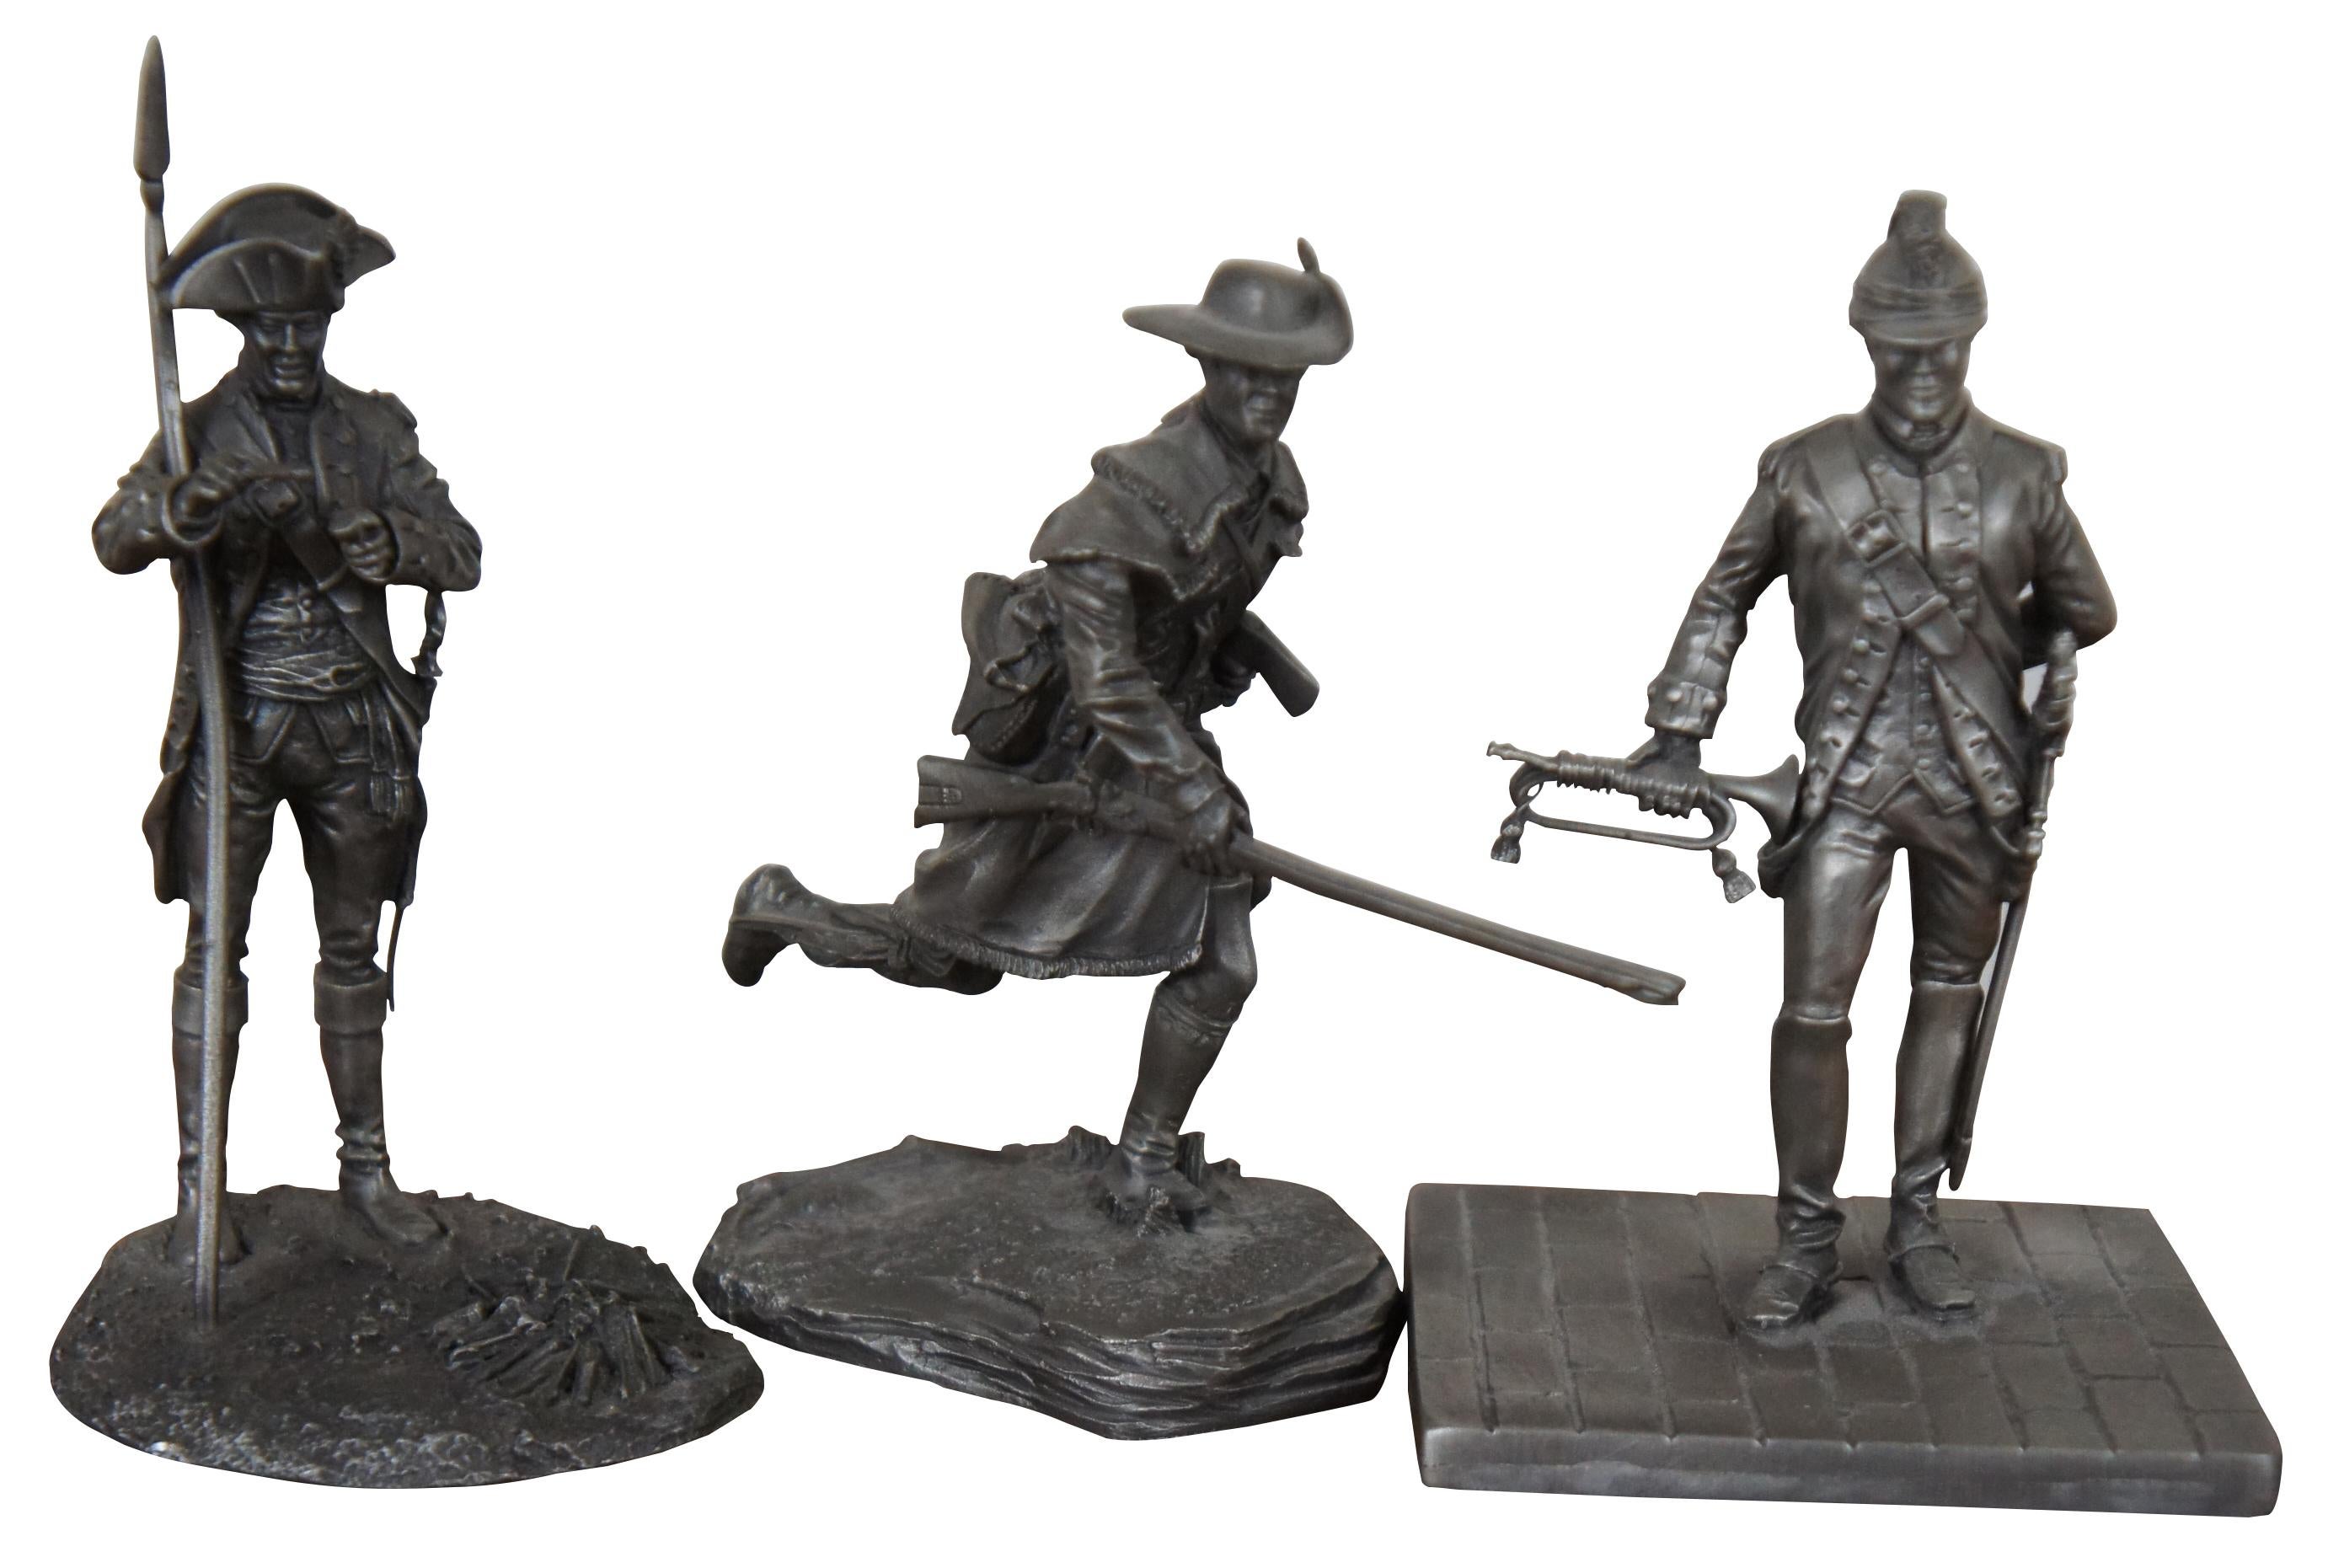 Set of twelve vintage 1970’s pewter American Revolution soldiers produced by The Franklin Mint. Set includes Private - 3rd North Carolina Regiment, Artilleryman - Rhode Island Train of Artillery, Private - Green Mountain Rangers of New Hampshire,